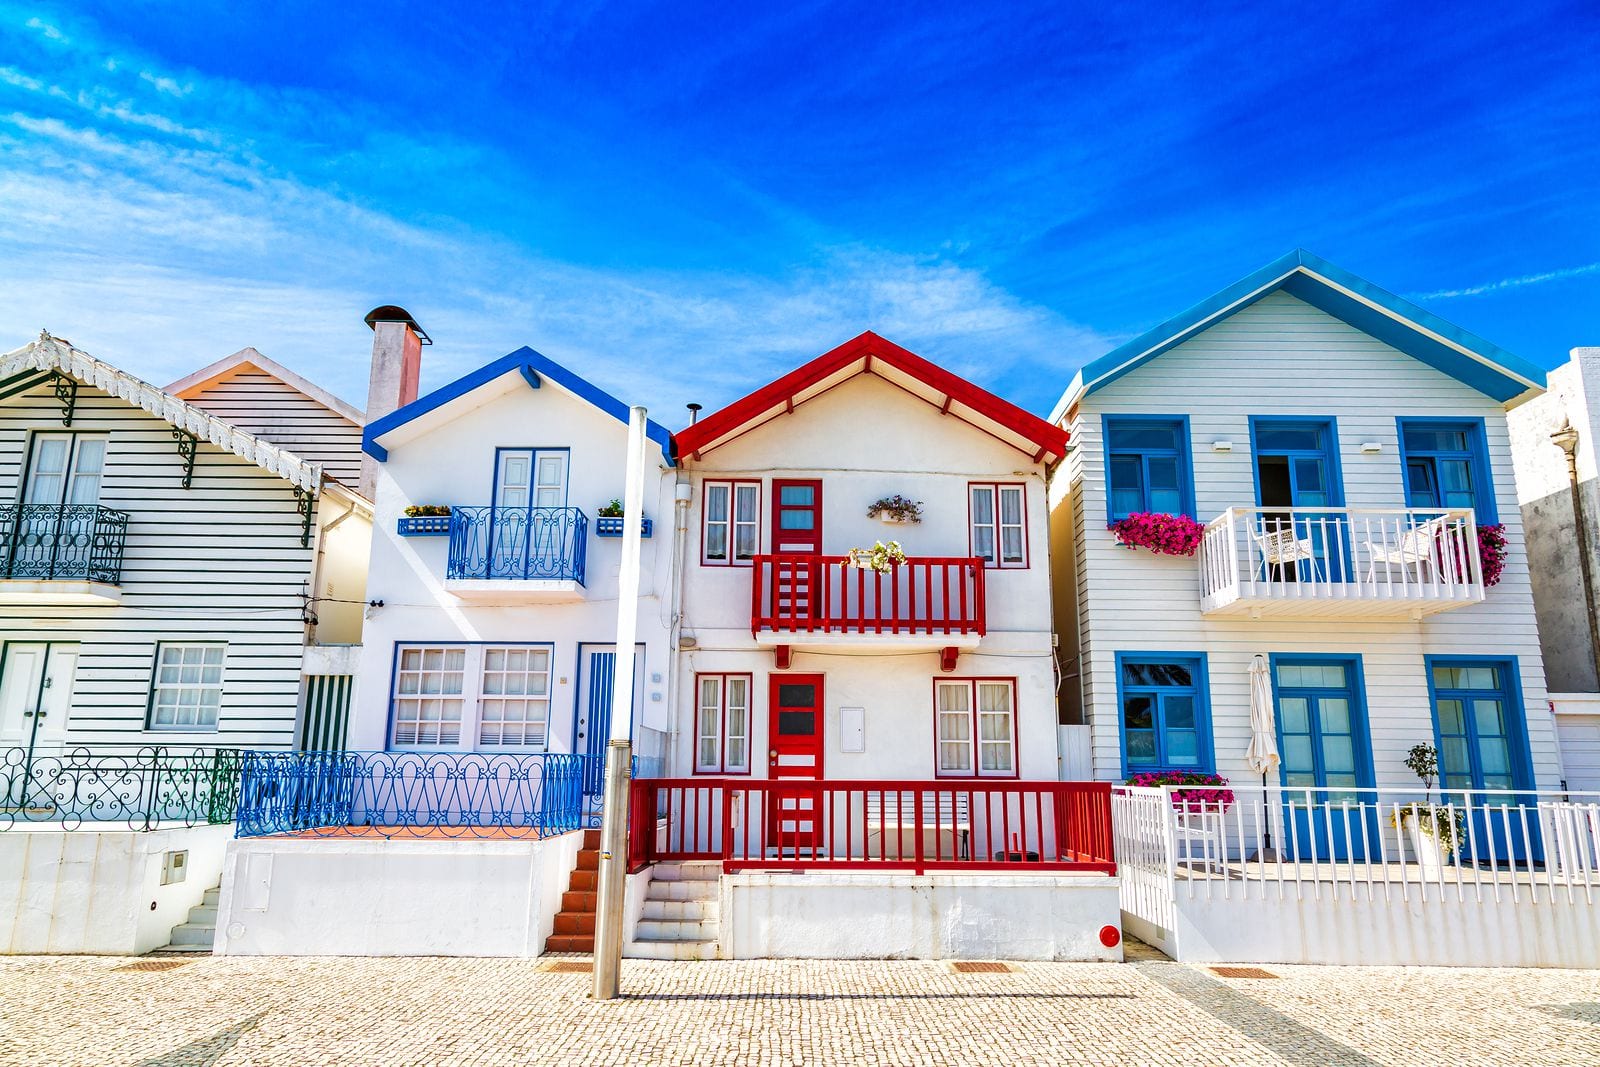 Is Buying a Beach House a Good Investment? | Mashvisor